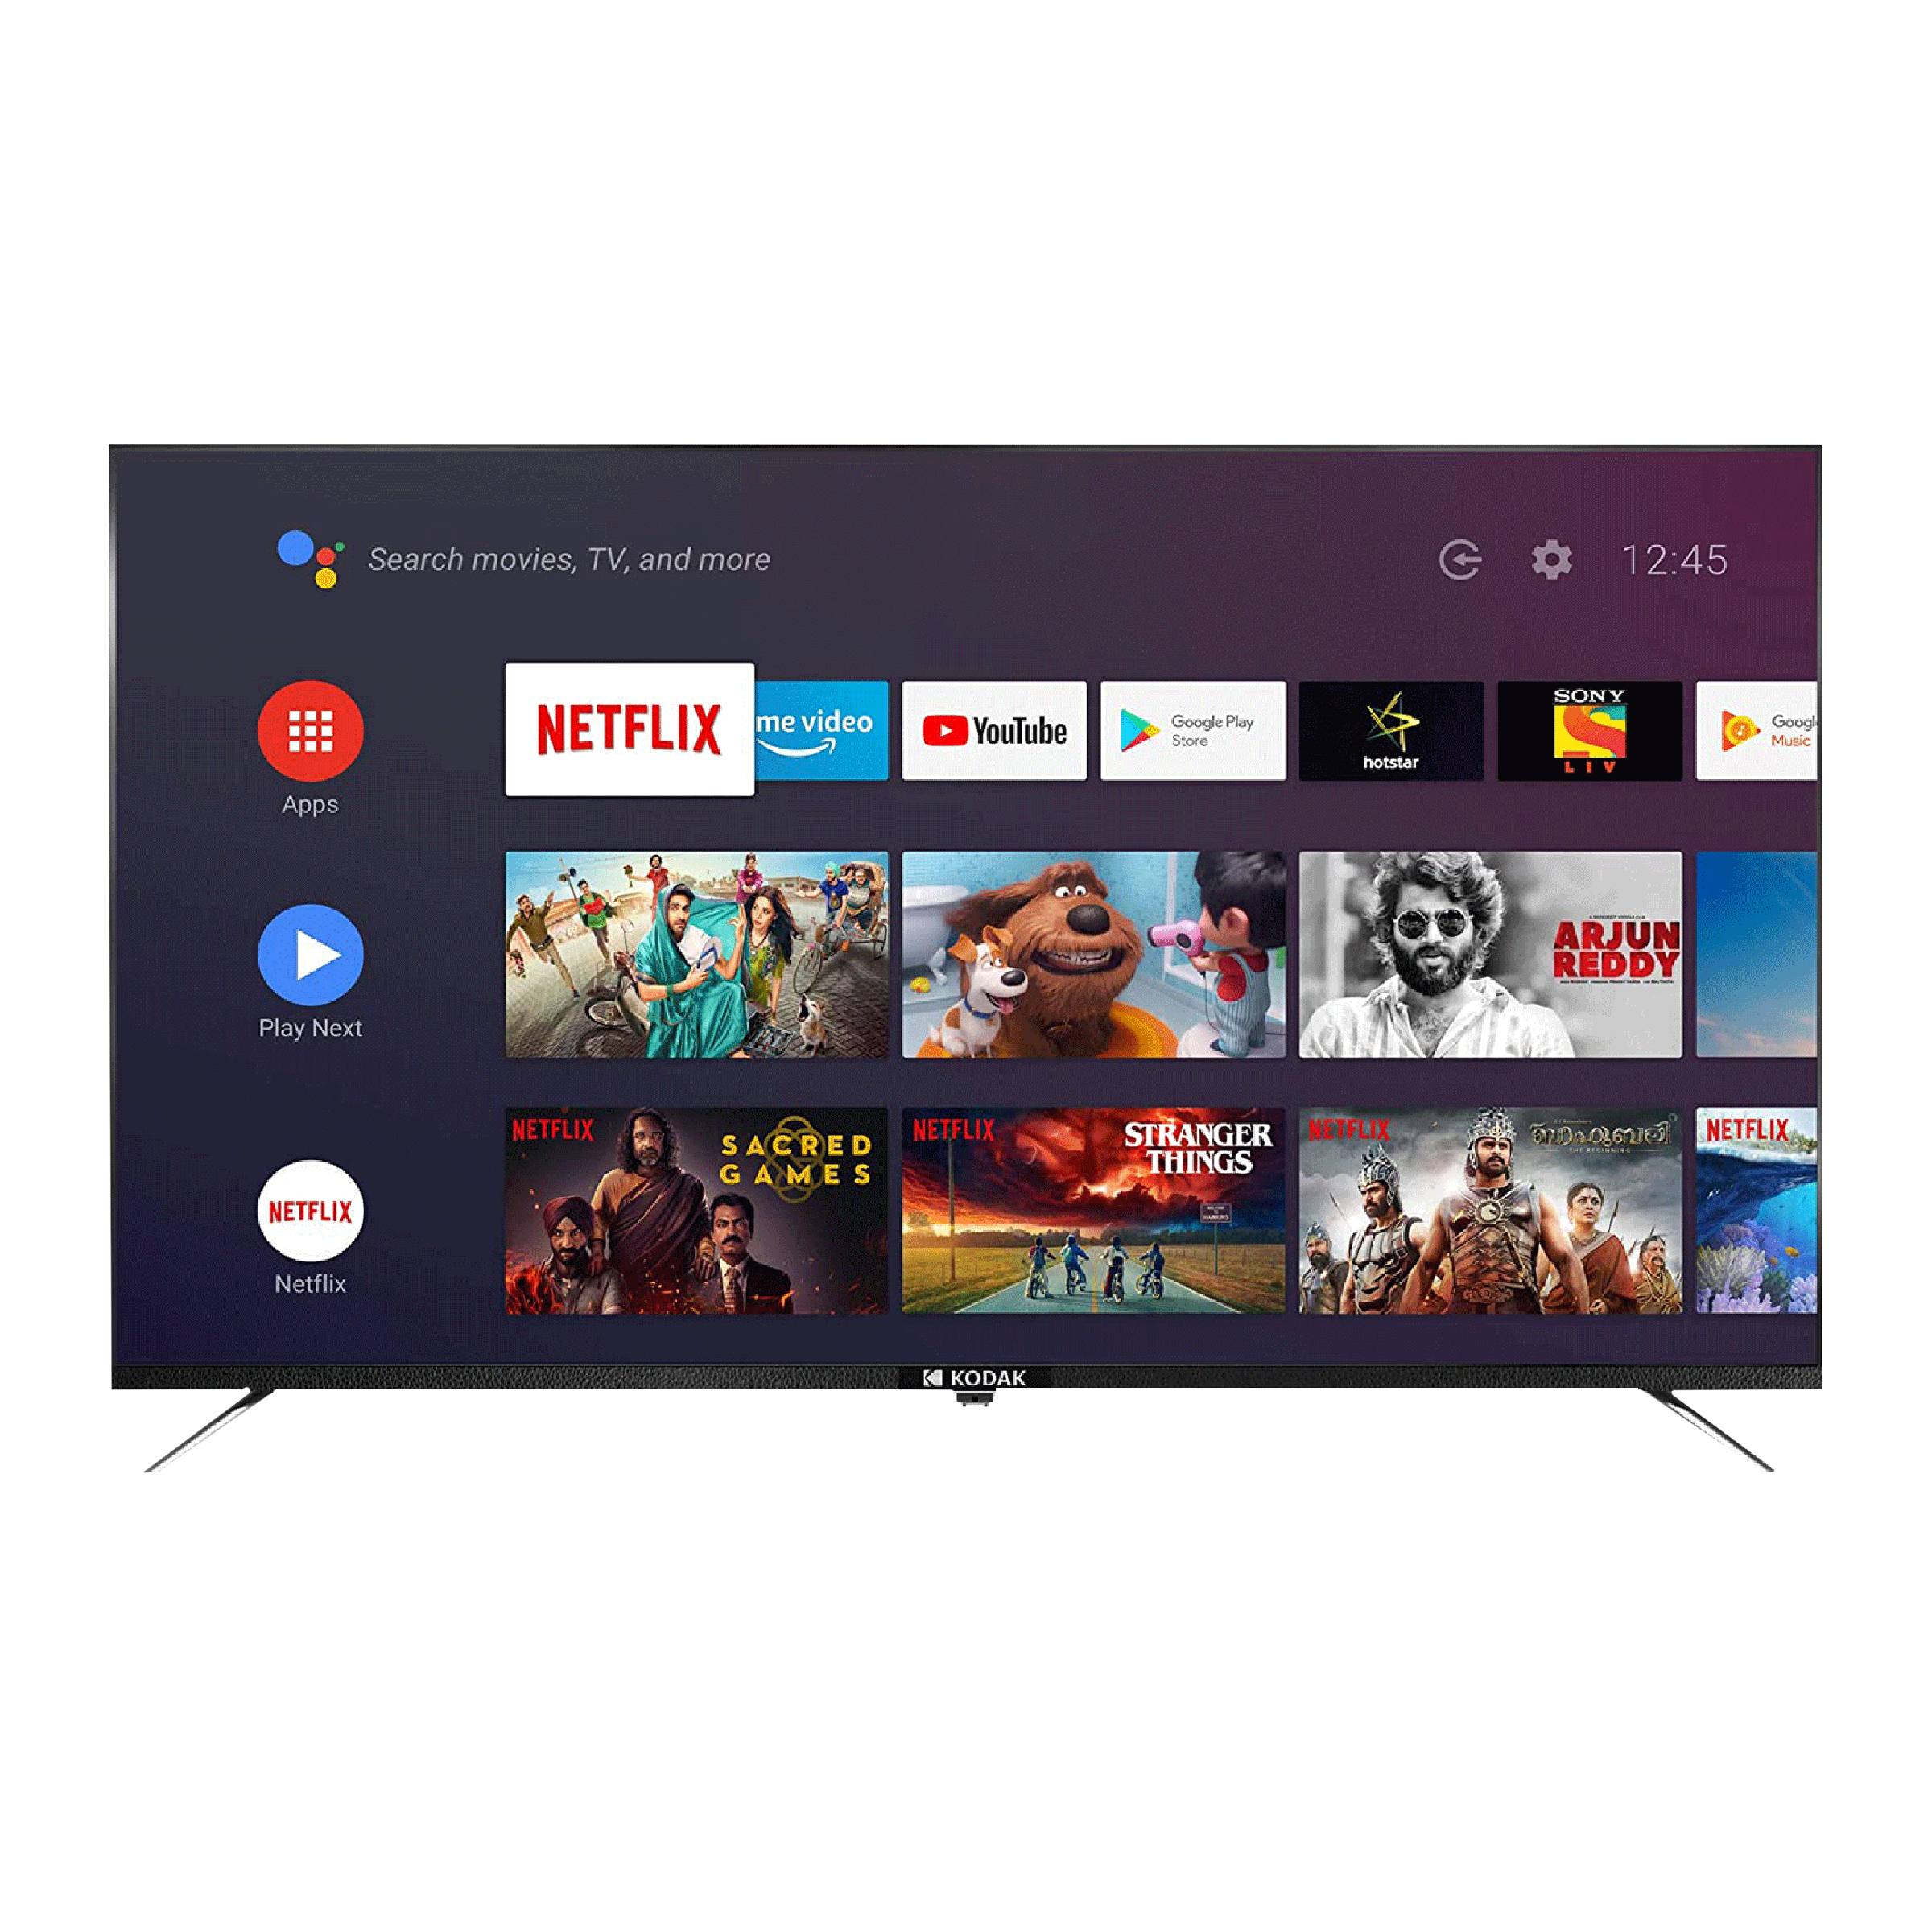 Kodak CA Series 164 cm (65 inch) 4K Ultra HD LED Android TV with Google Assistant (2020 model)_1